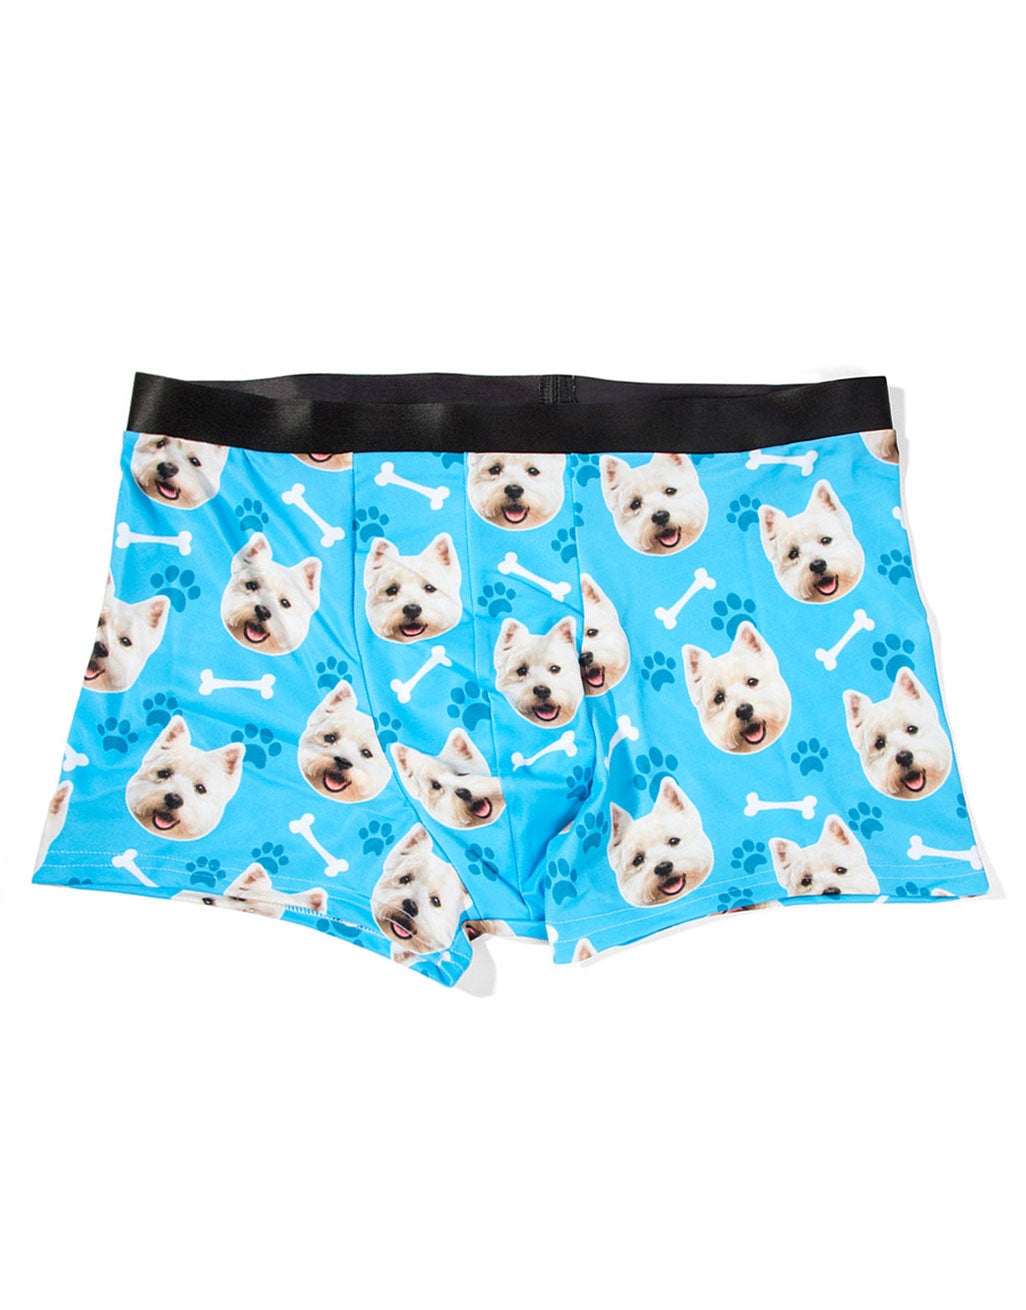 Your Dog on Boxers